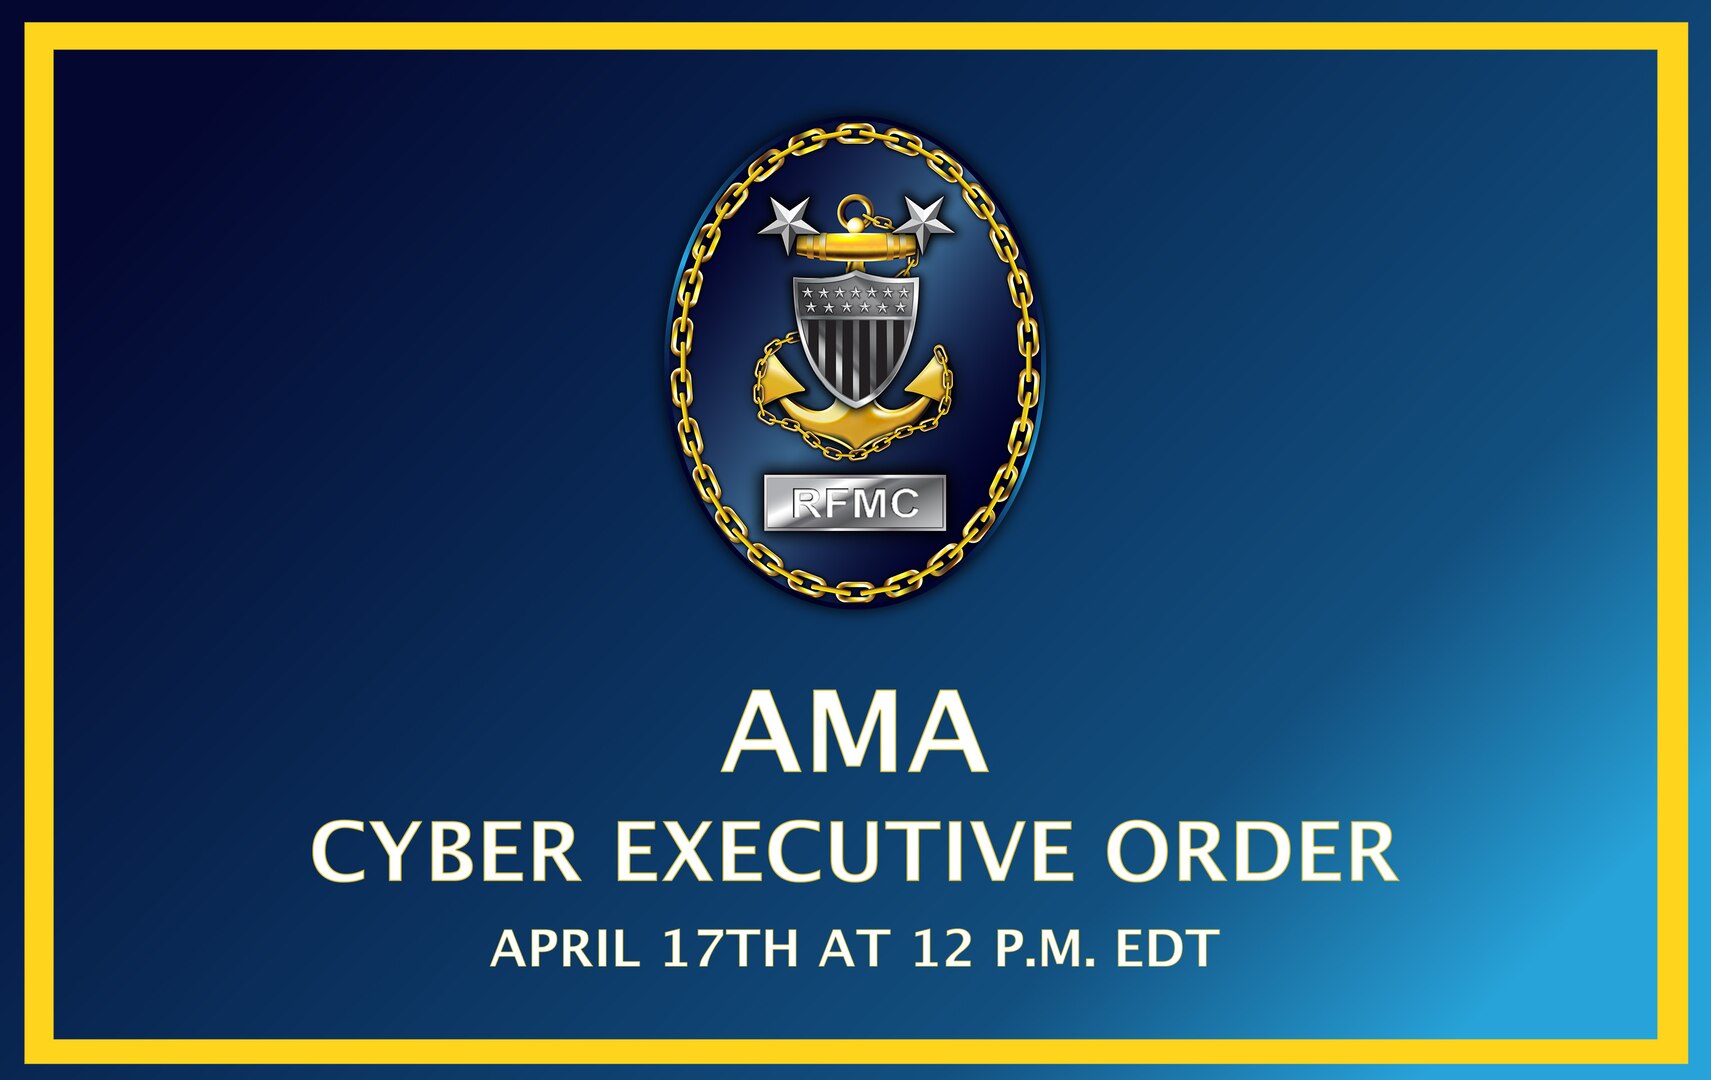 Cyber Executive Order AMA with Rating Force Master Chiefs will be held April 17th at 12 p.m. EDT.